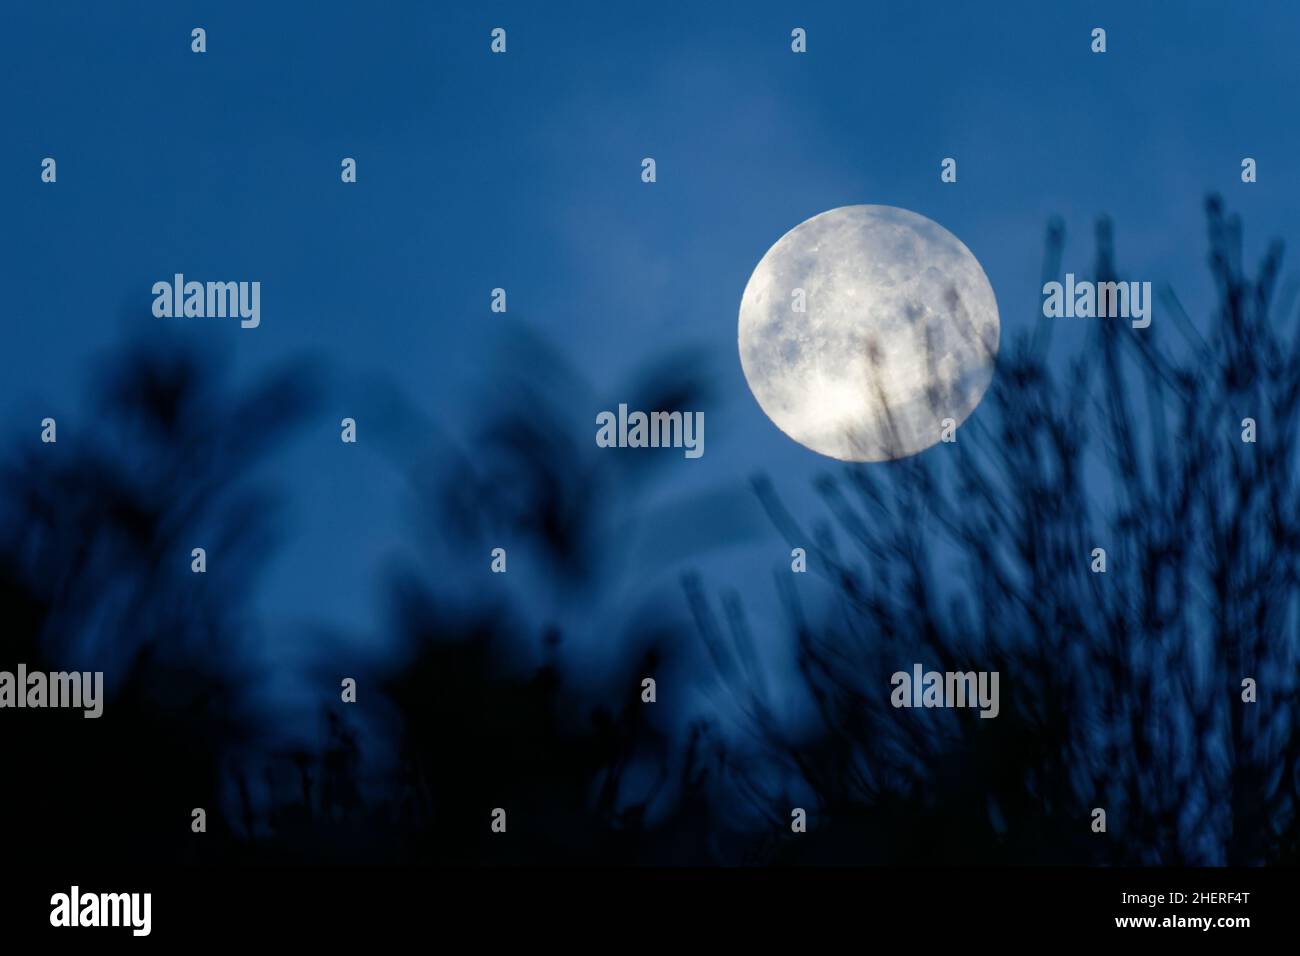 Close up of the full moon rising at night behind silhouettes of tree branches Stock Photo